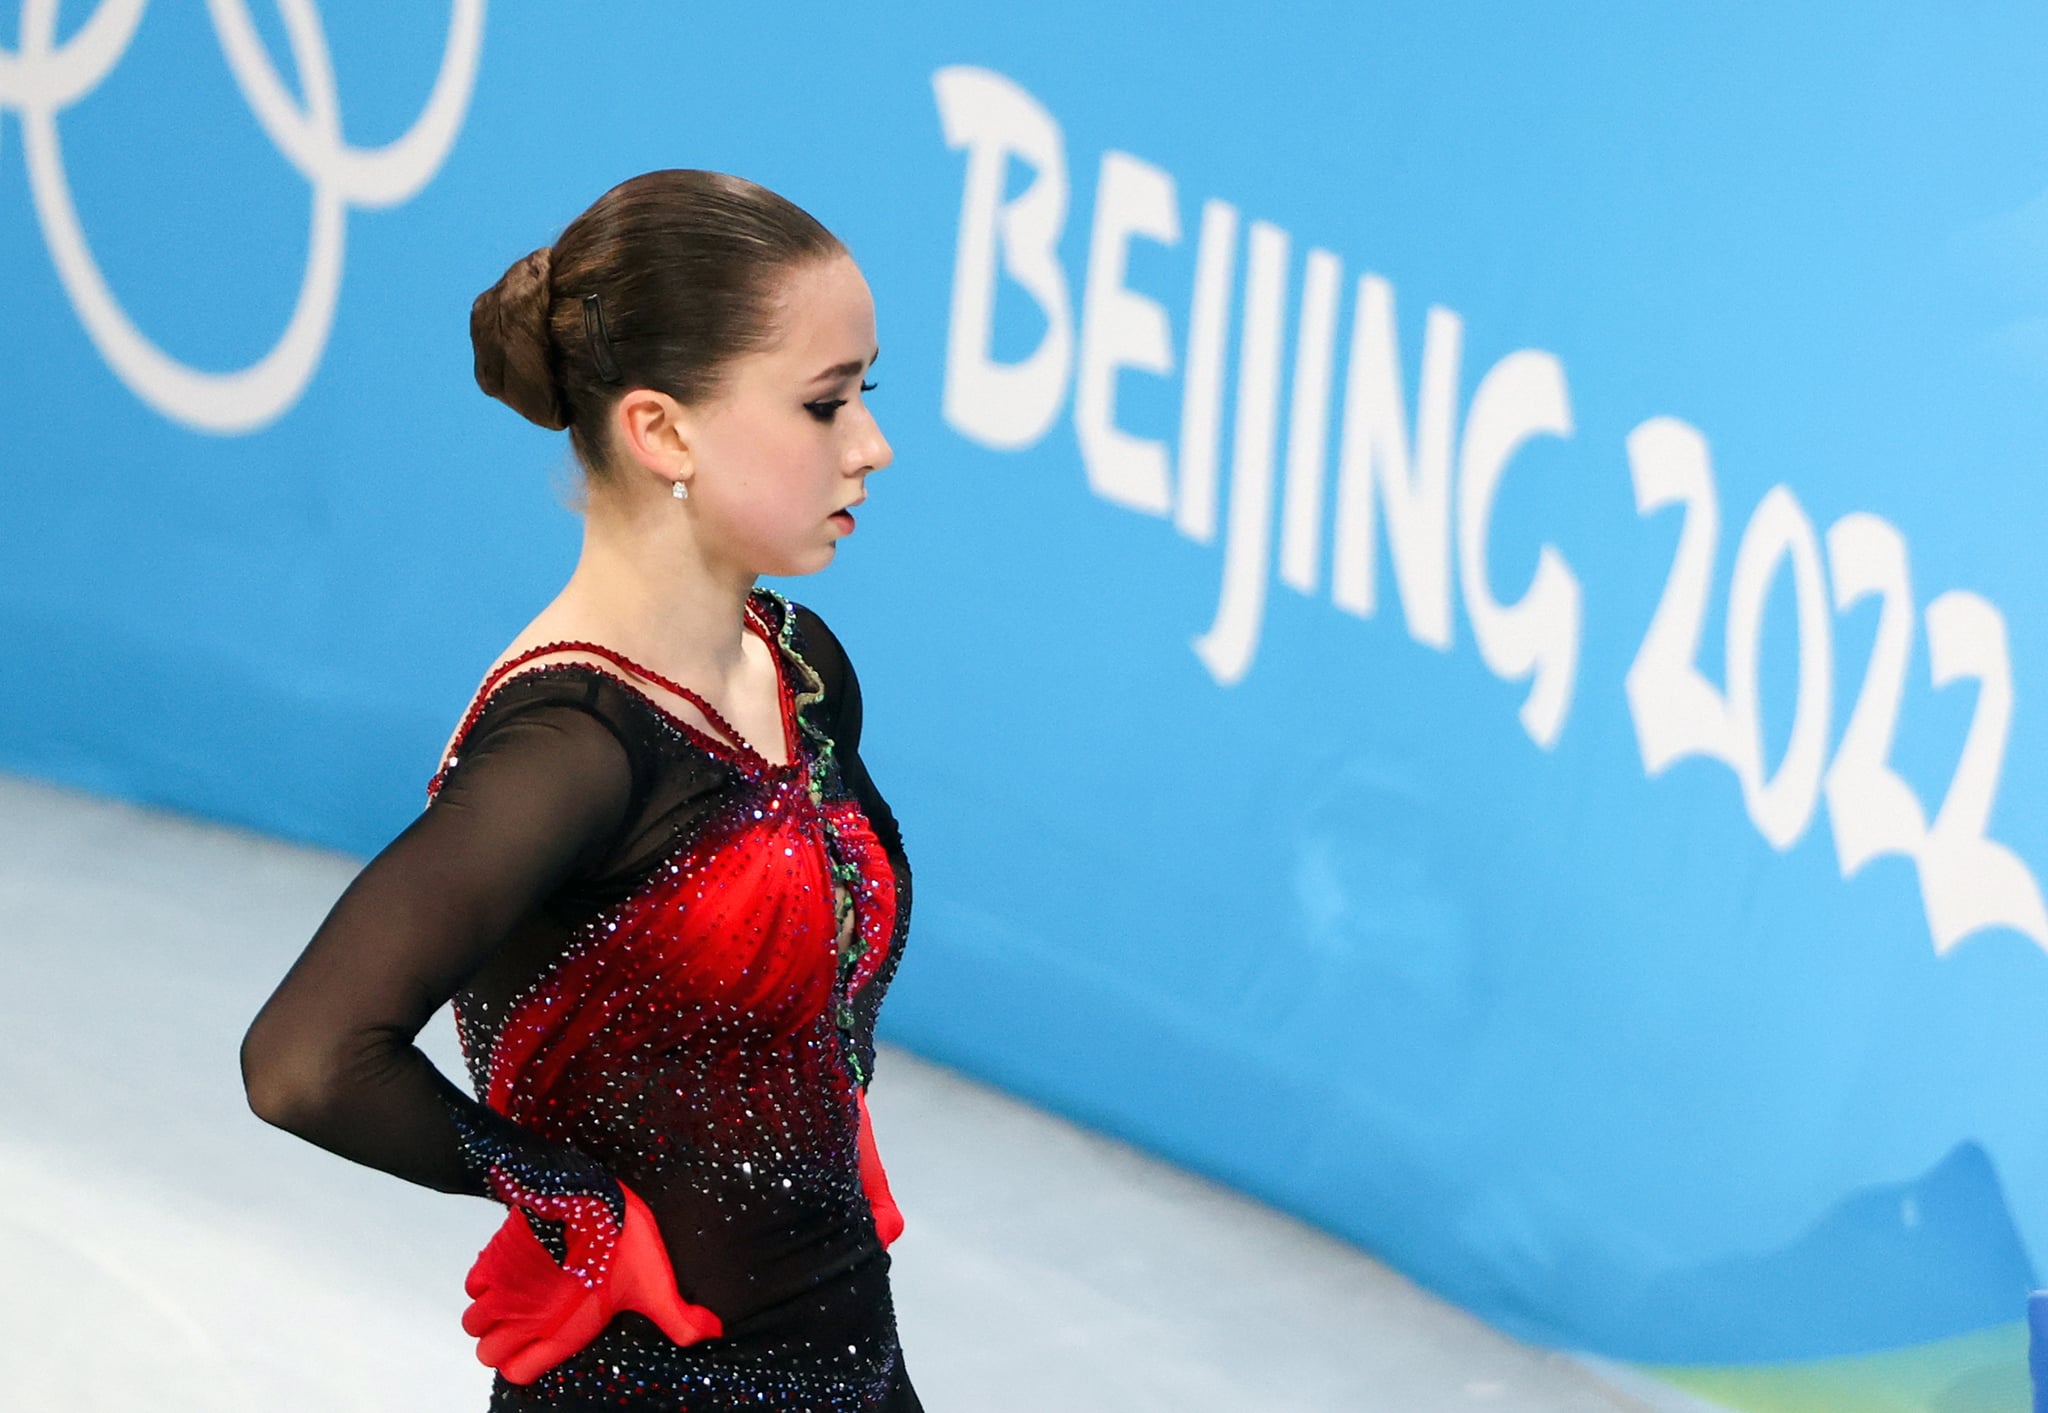 BEIJING, CHINA - FEBRUARY 17, 2022: Figure skater Kamila Valiyeva of Team ROC performs in the women's free skating programme at the Capital Indoor Stadium at the 2022 Winter Olympic Games.